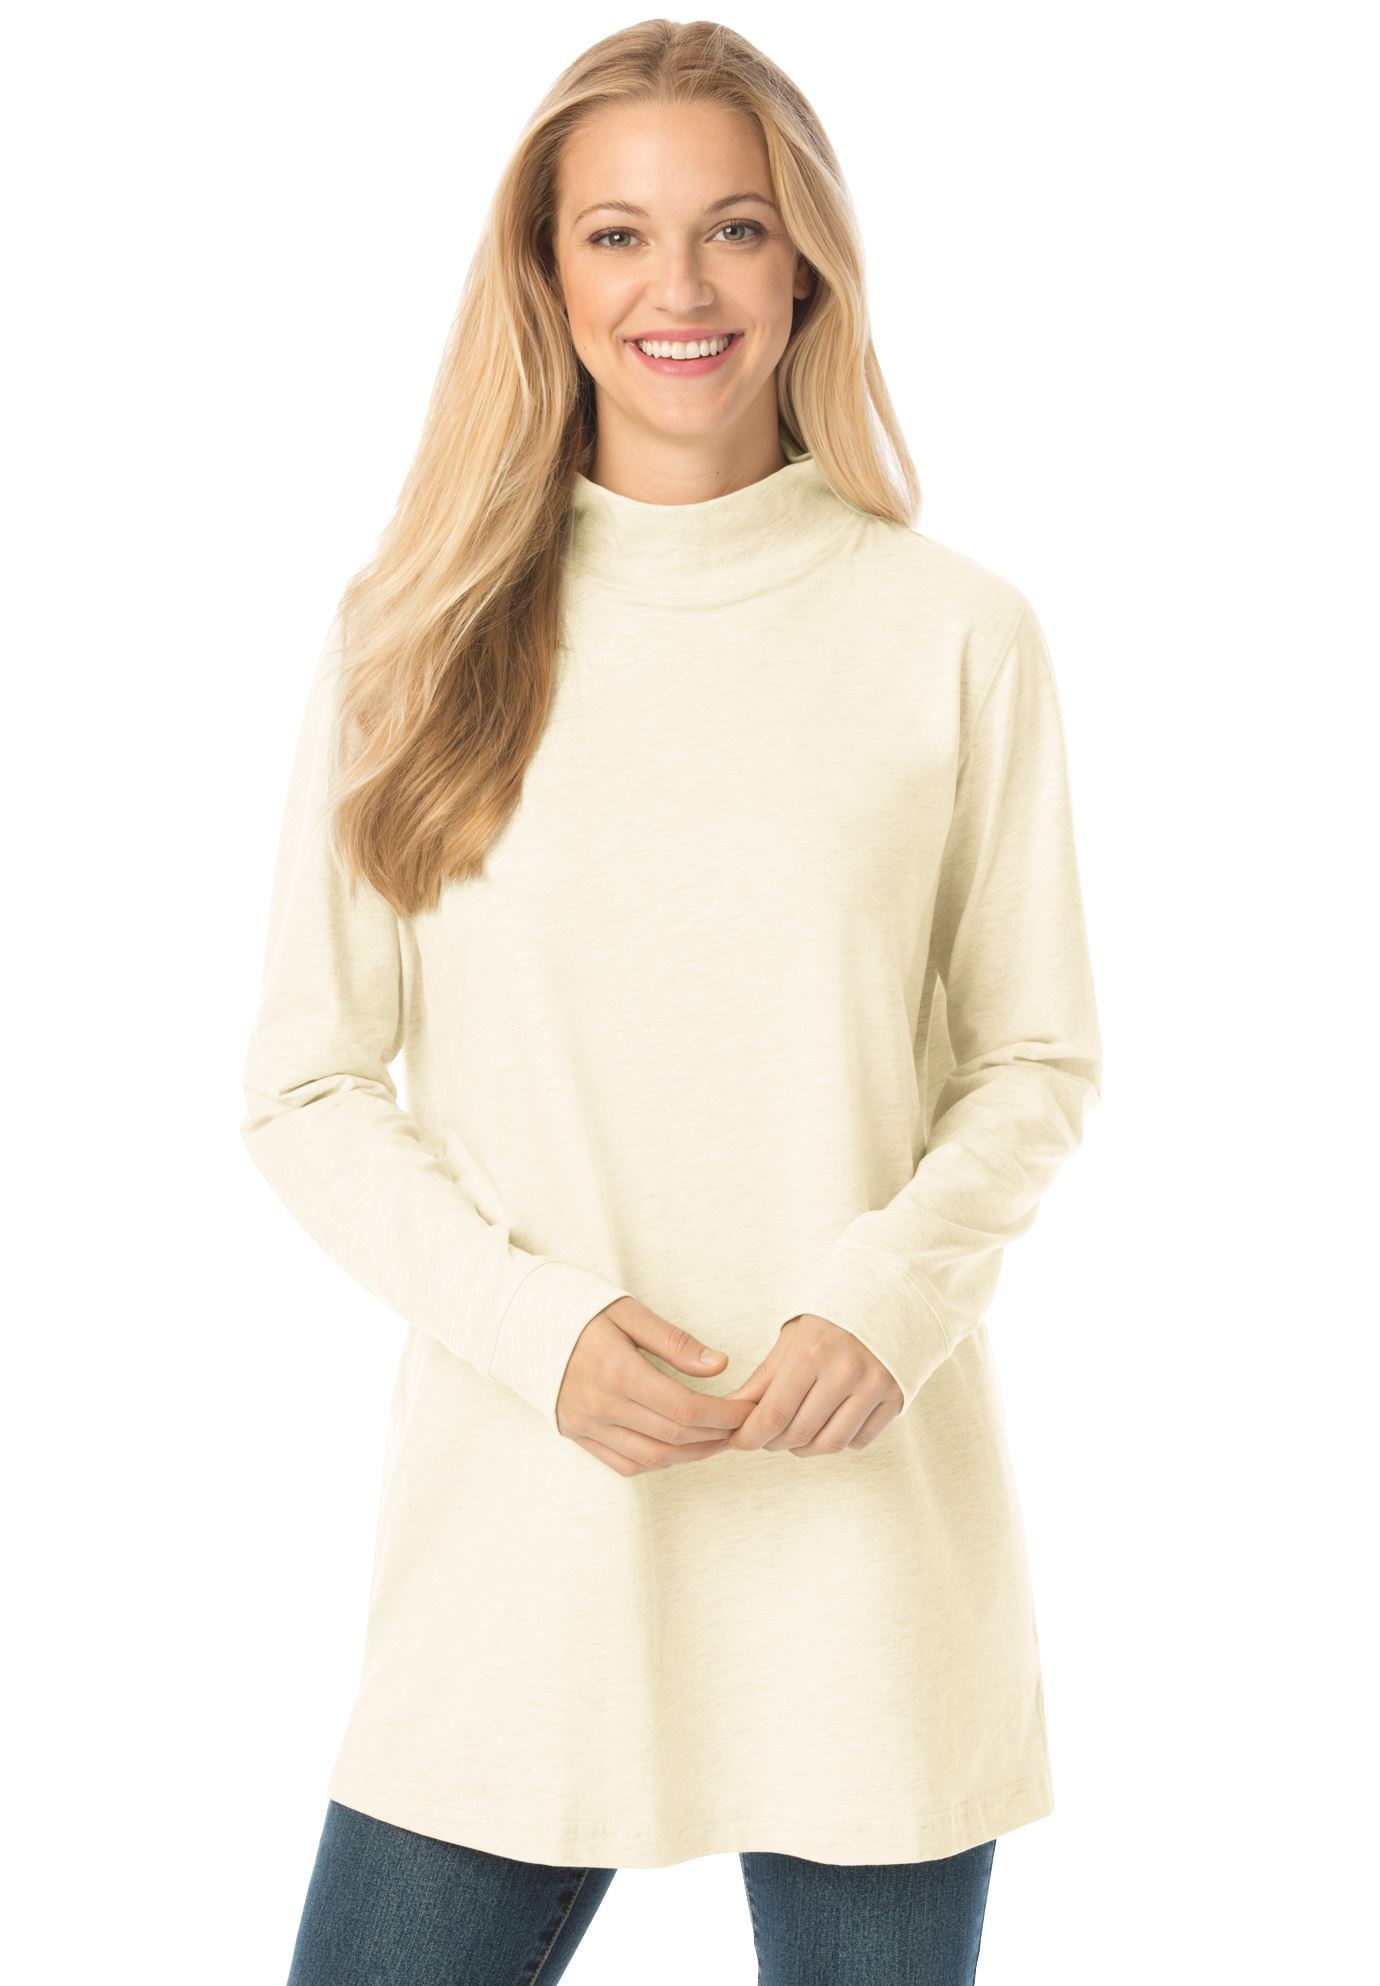 Top, Perfect mock turtleneck tunic| Plus Size Tops | Woman Within